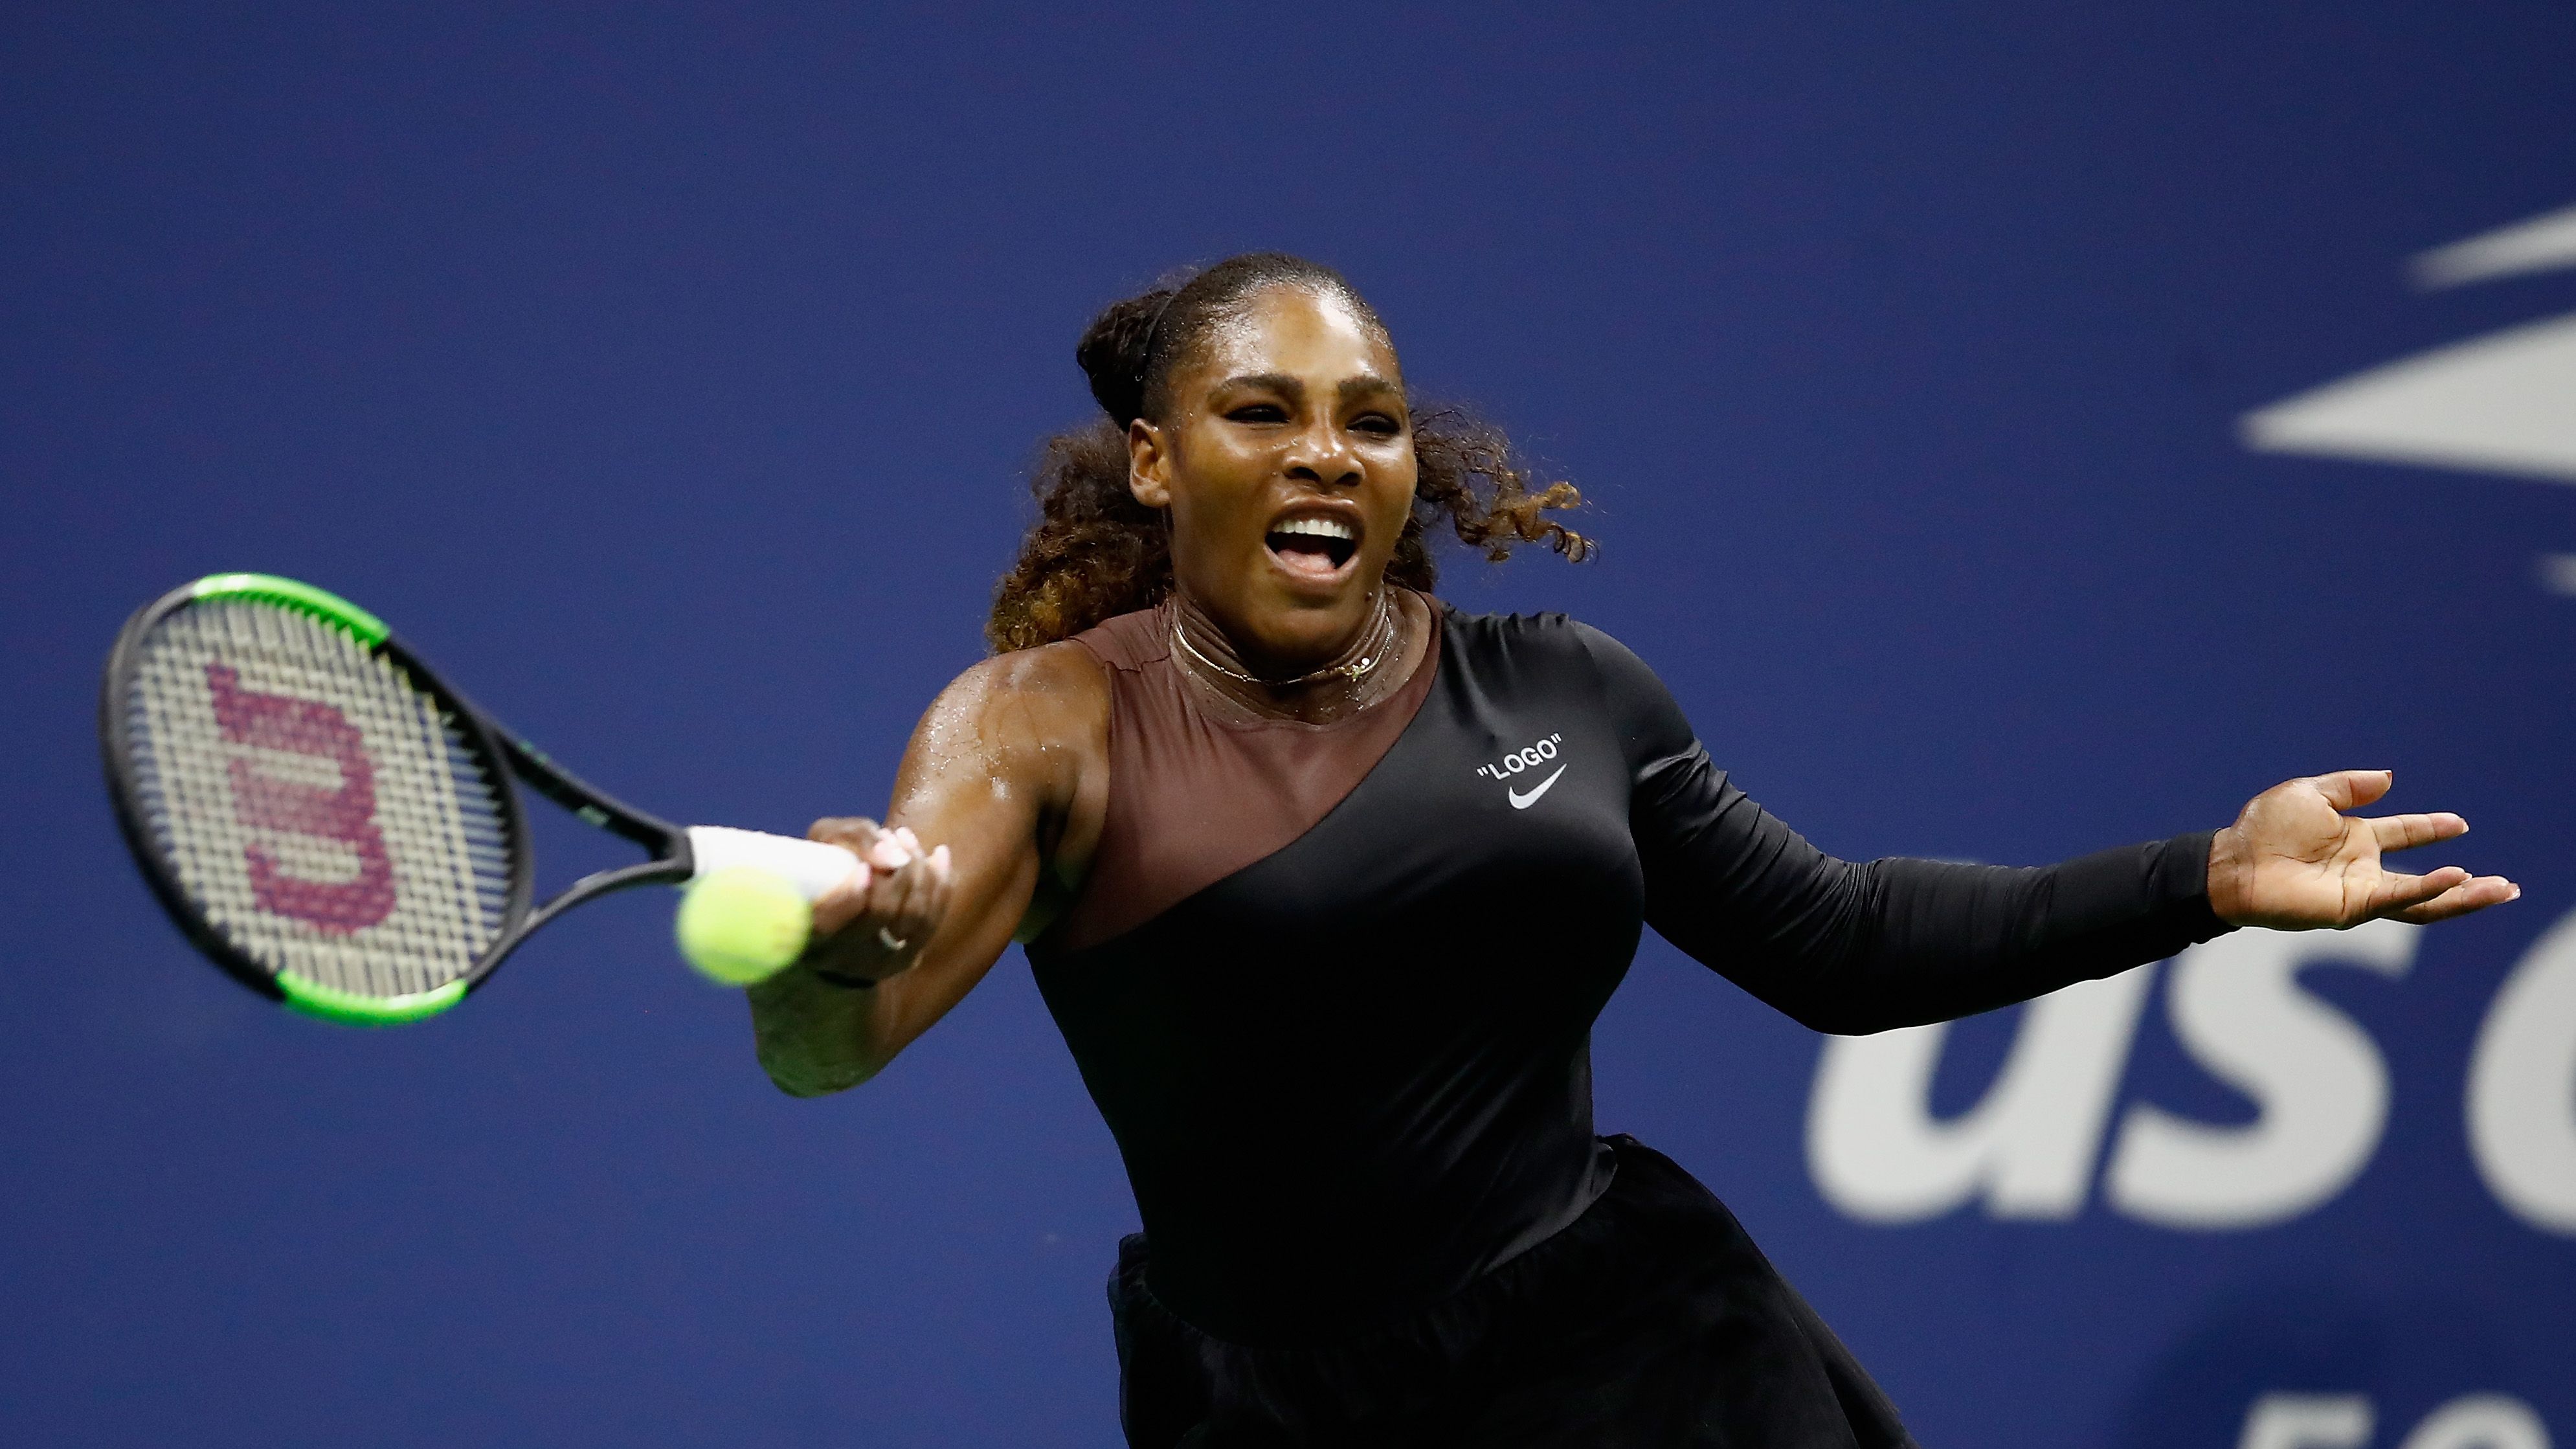 Virgil Abloh X Serena Williams Nike Collab: The Queen Collection